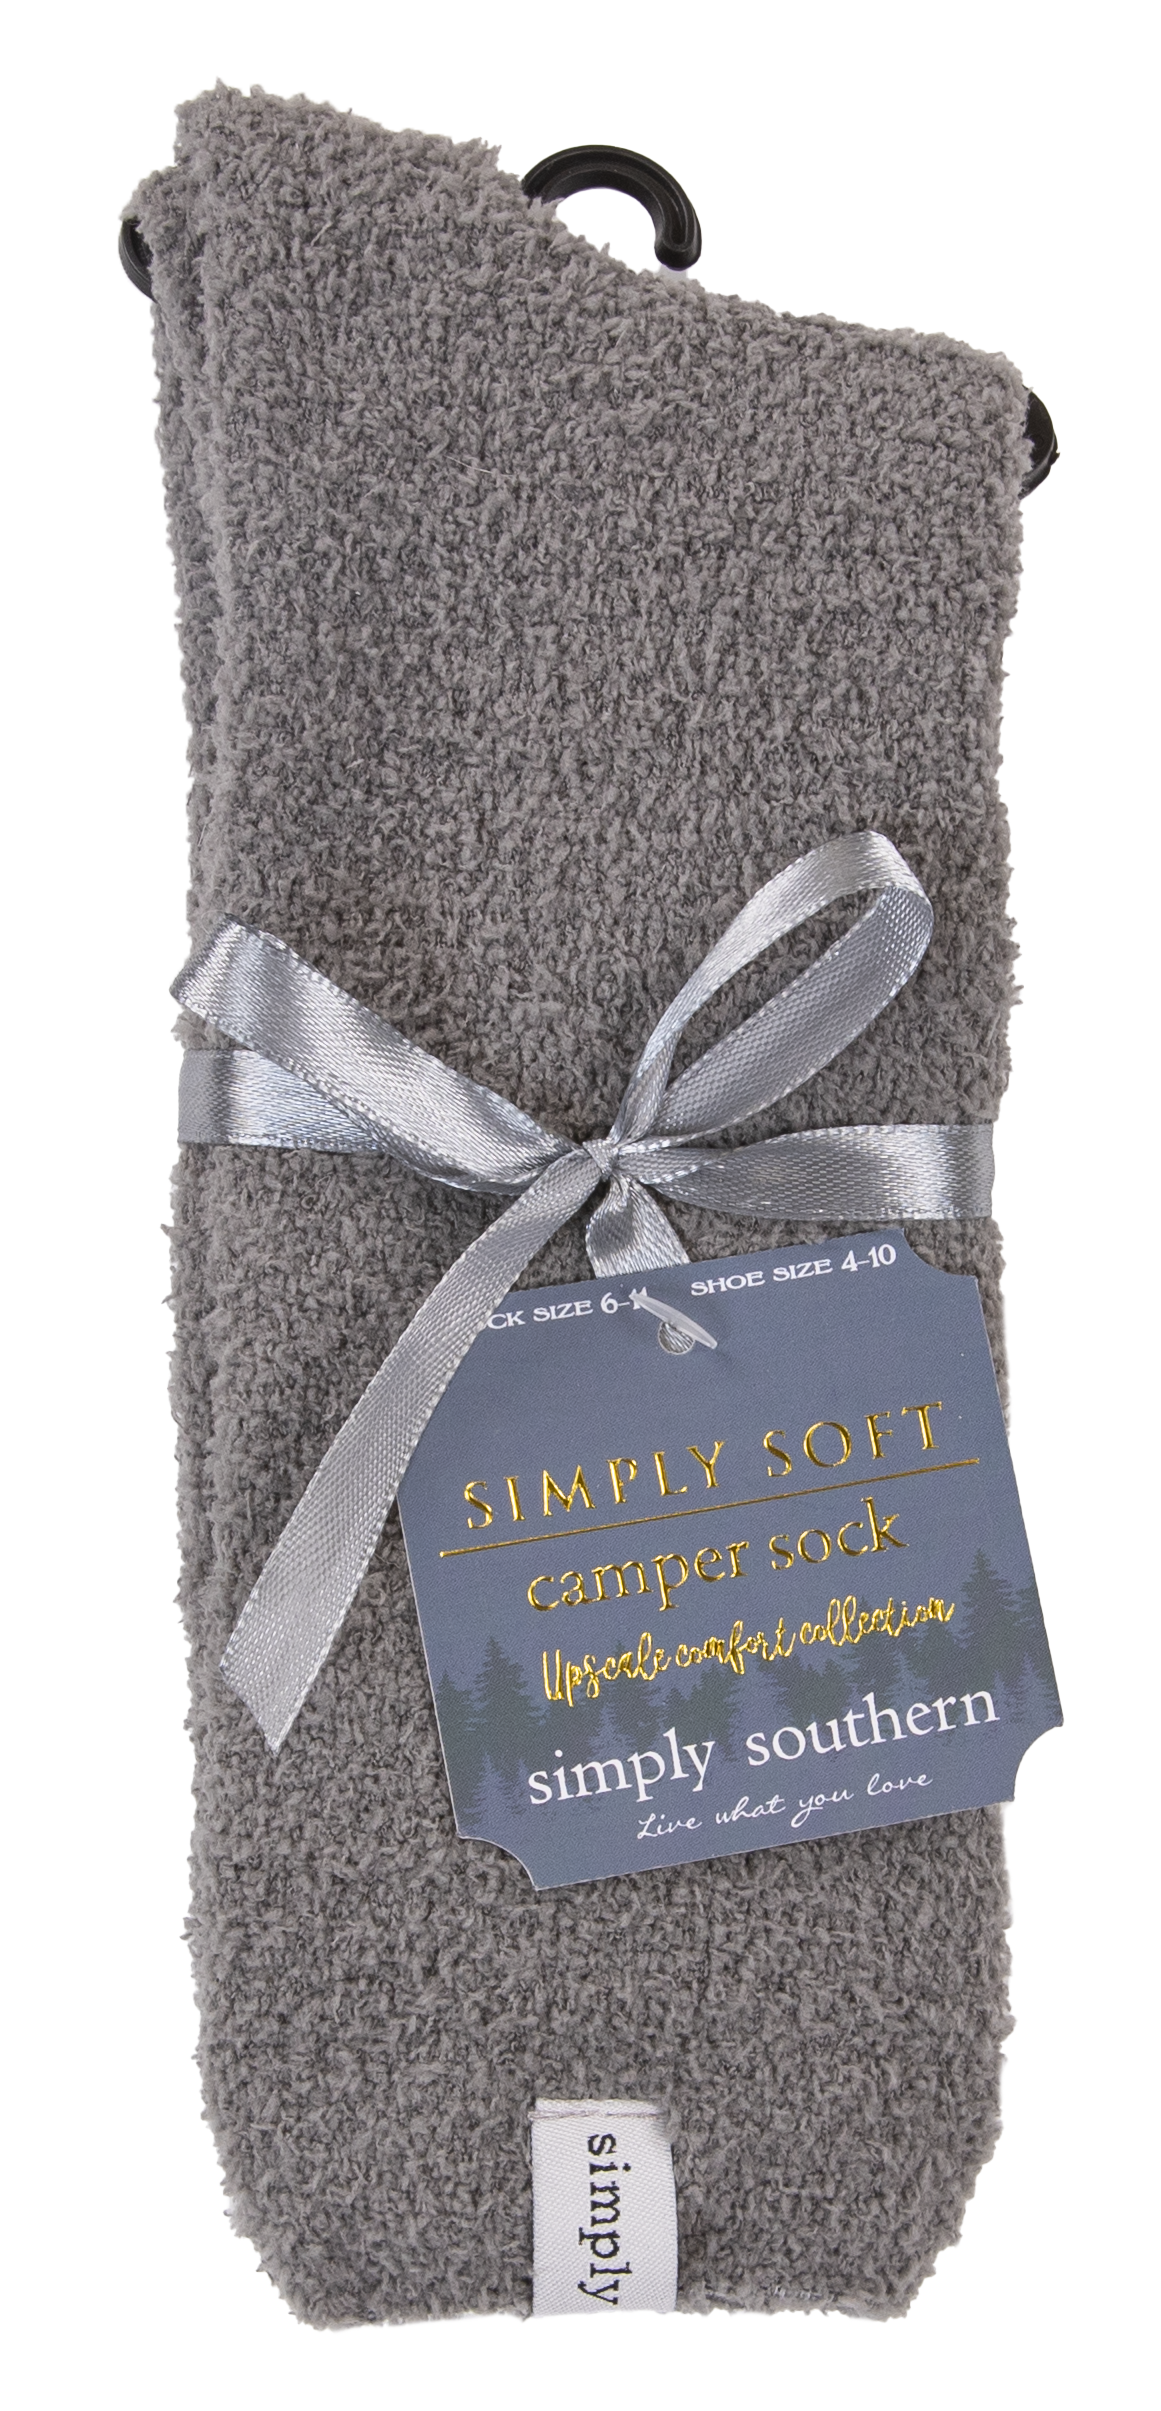 Simply Southern Soft Socks- Solid Grey